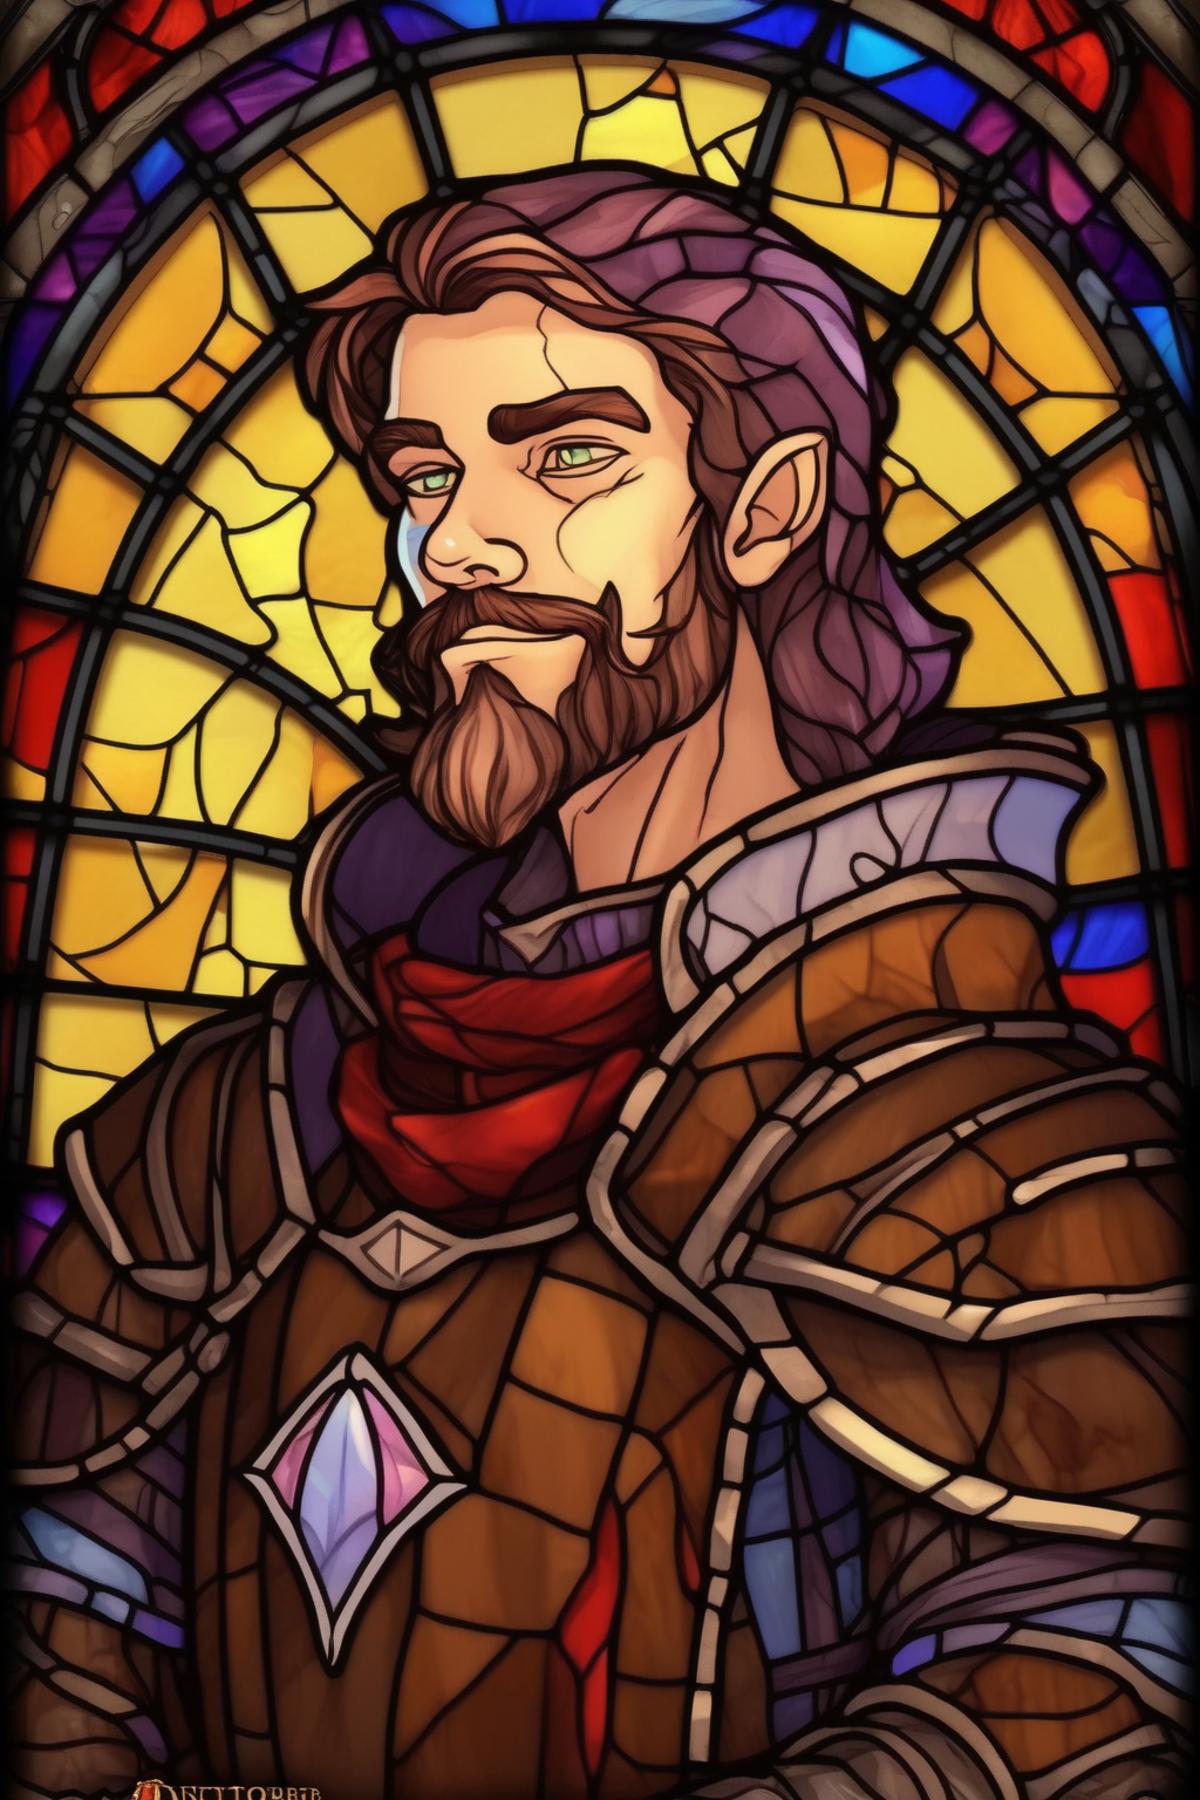 Stained Glass Portrait image by Kappa_Neuro